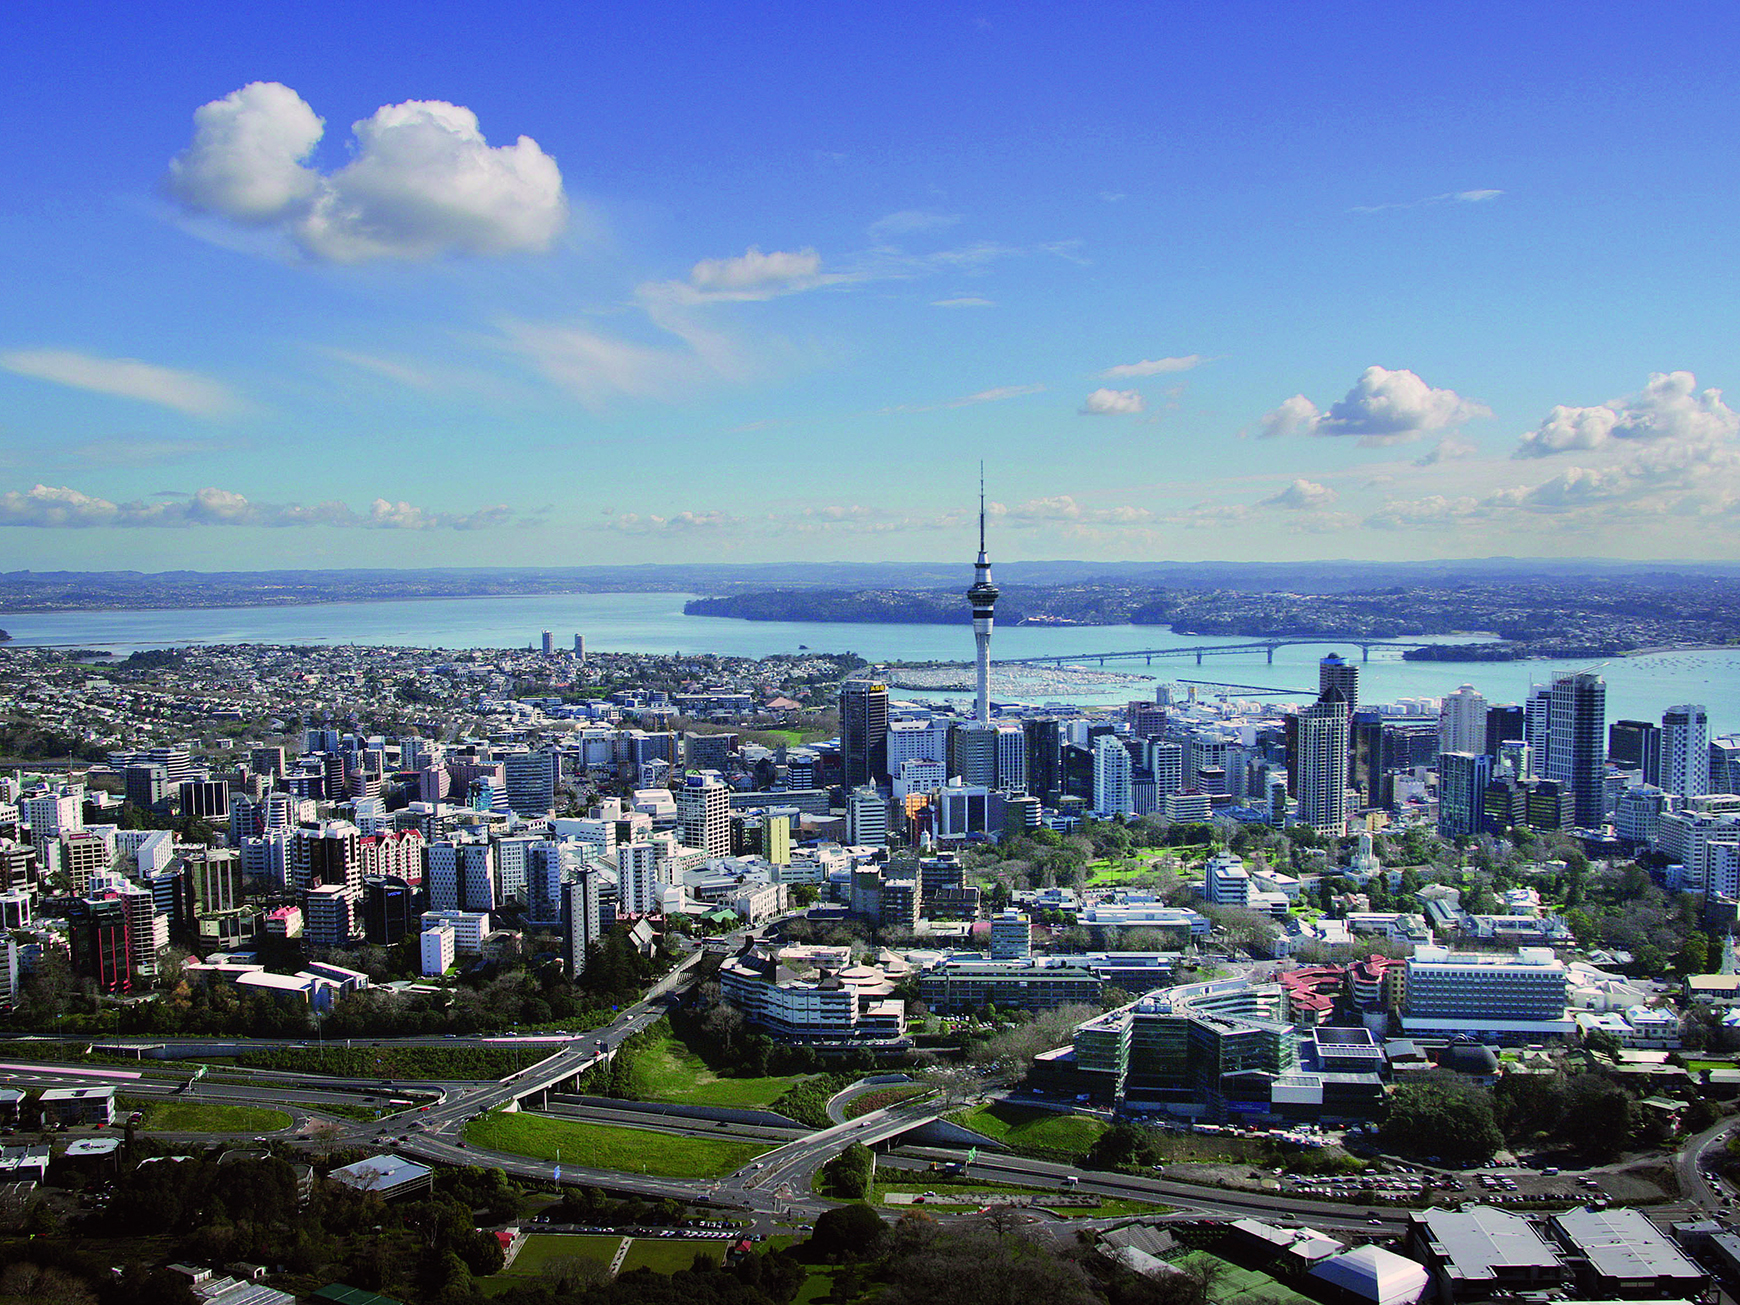 Study abroad in New Zealand with IFSA